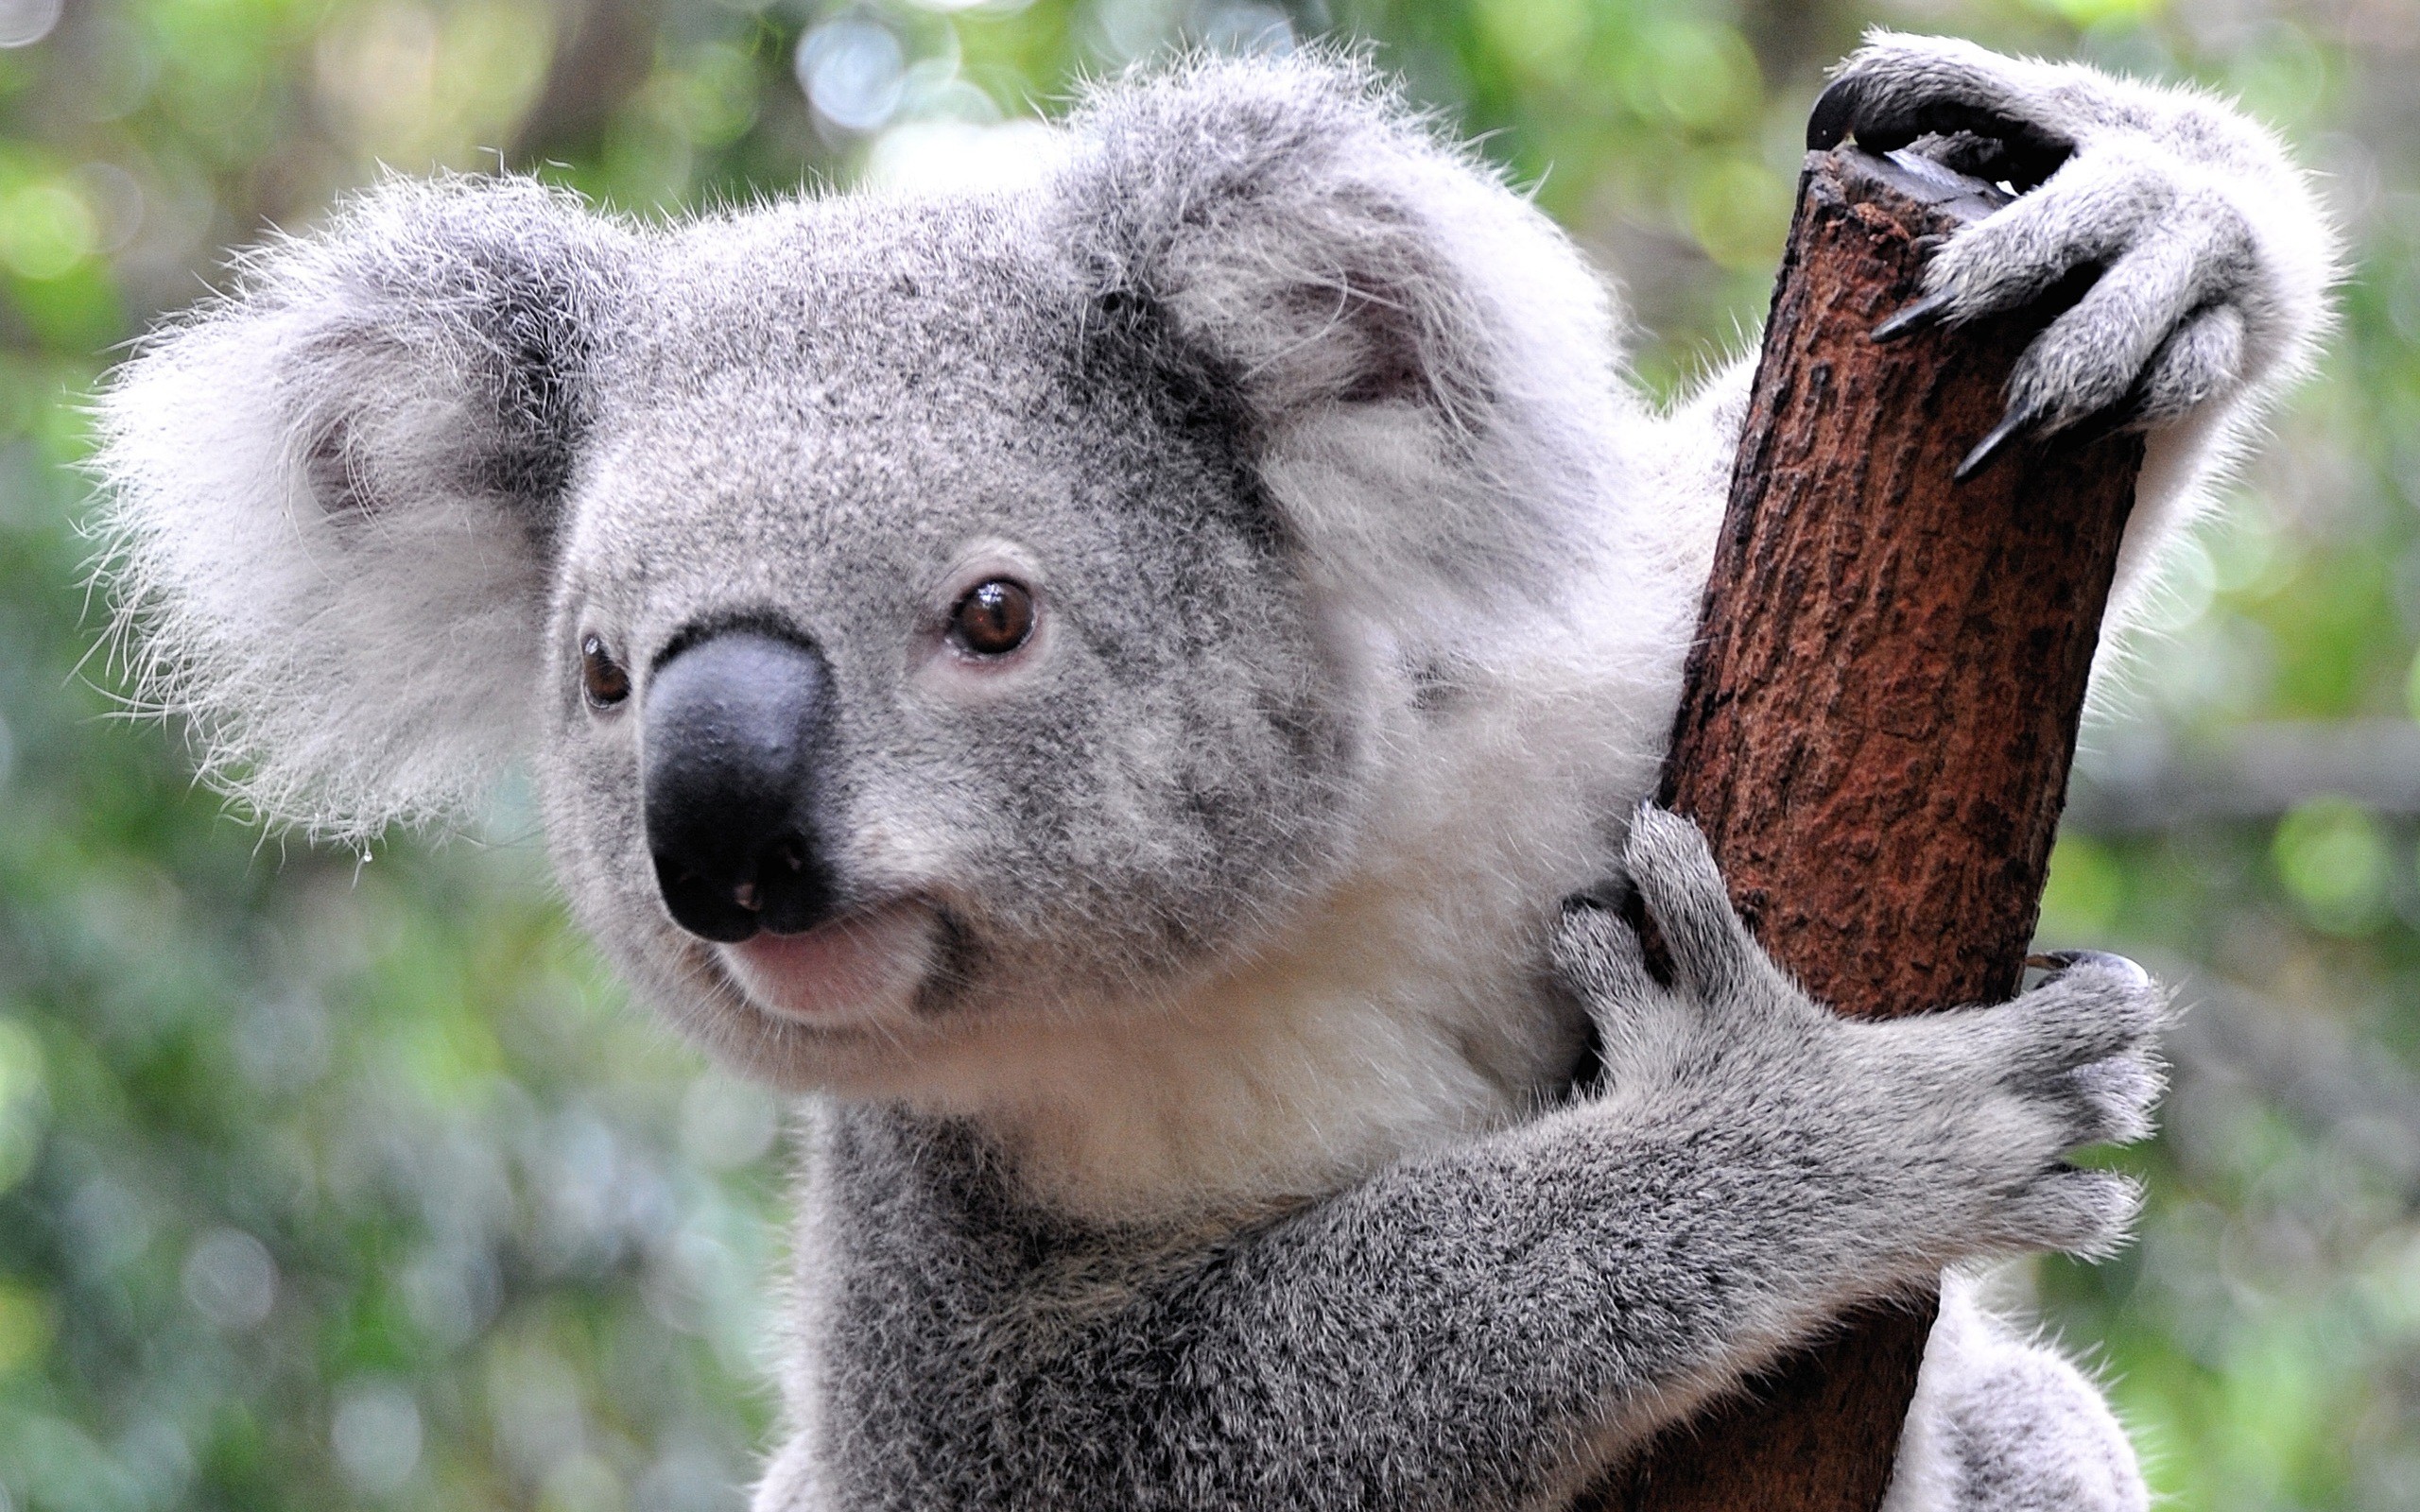 Koala Background Images HD Pictures and Wallpaper For Free Download   Pngtree